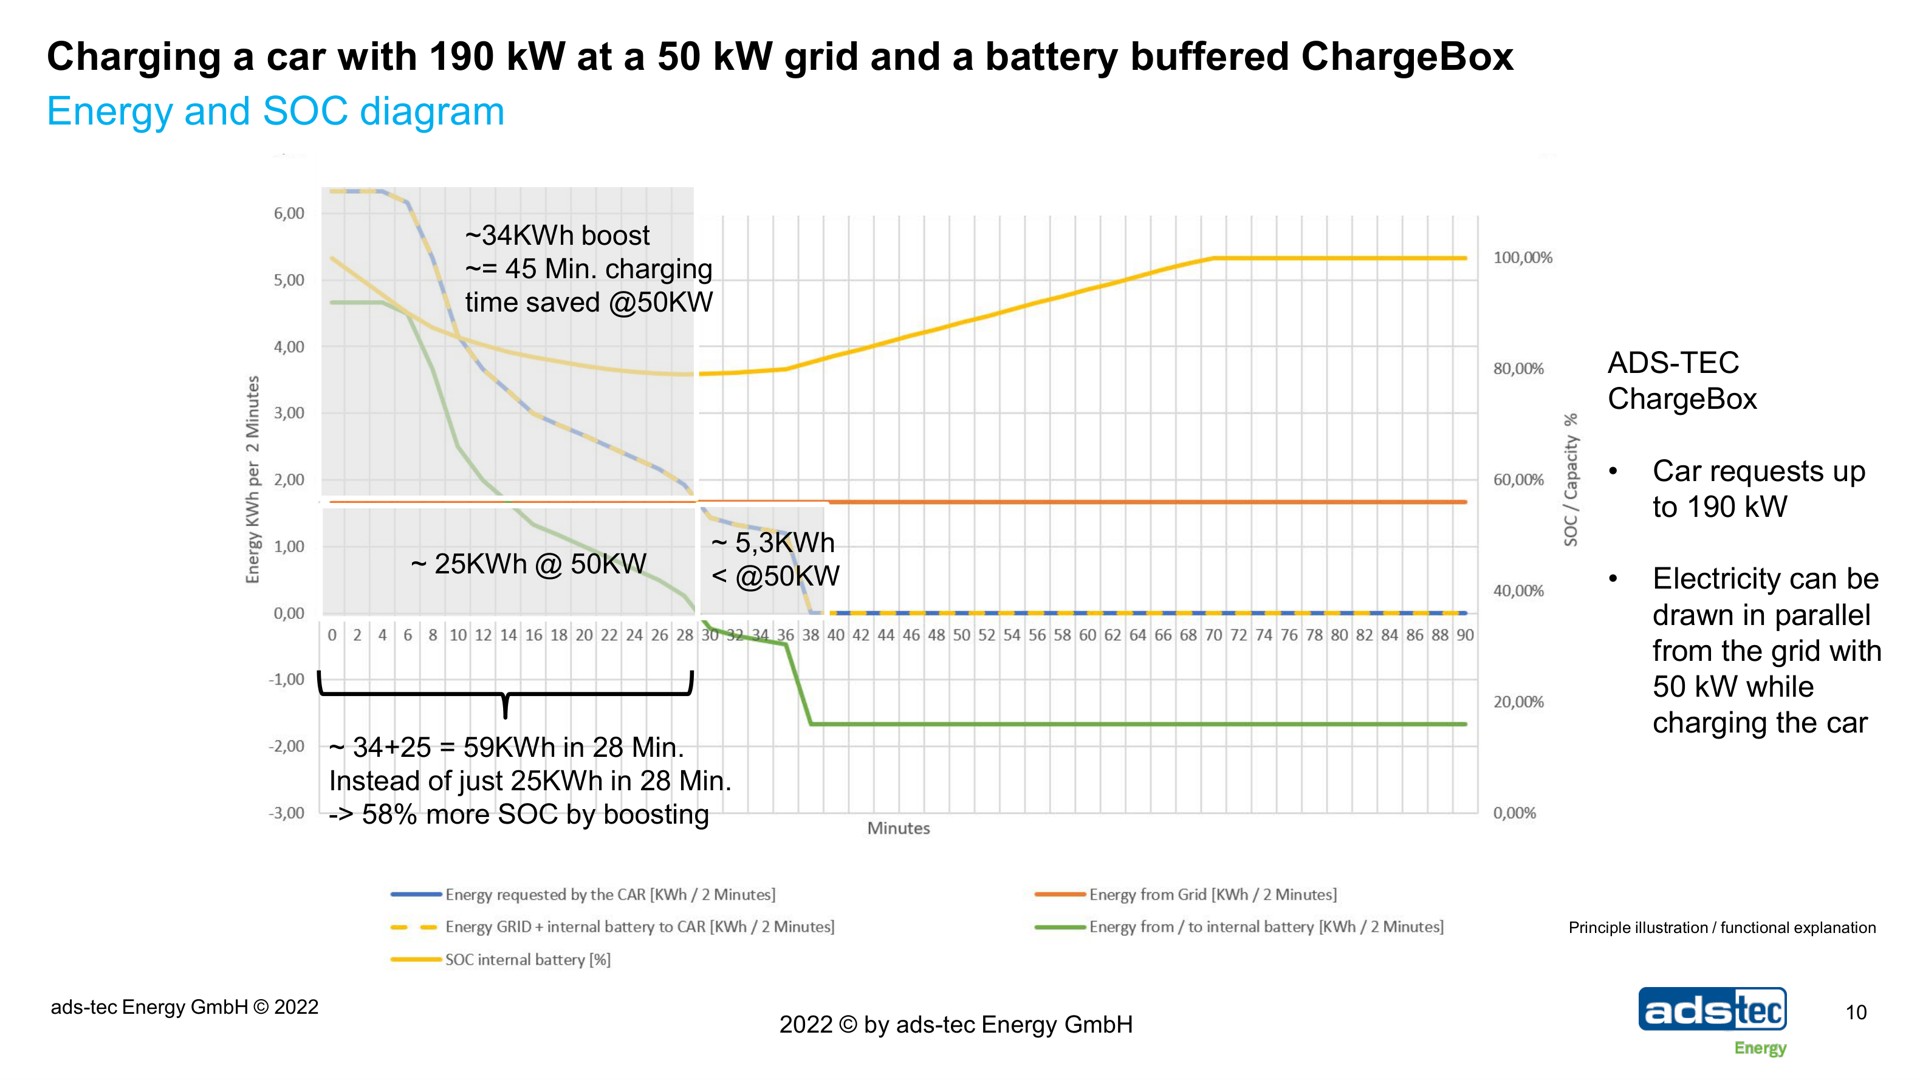 charging a car with at a grid and a battery buffered energy and soc diagram | ads-tec Energy